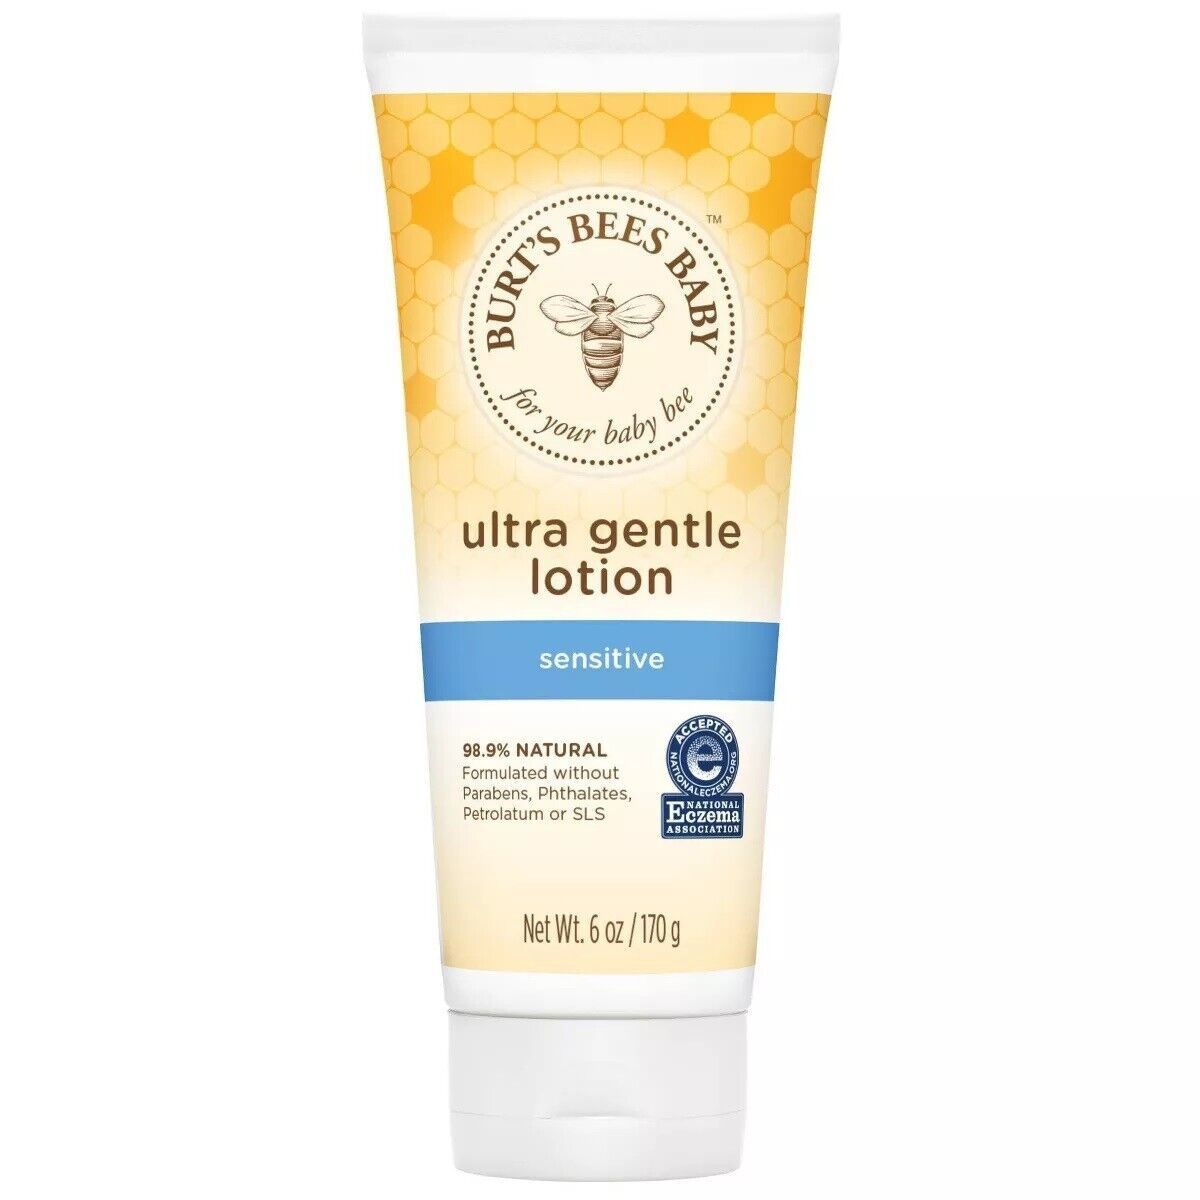 Primary image for Burt's Bees Baby Ultra Gentle Lotion Sensitive, 6 oz